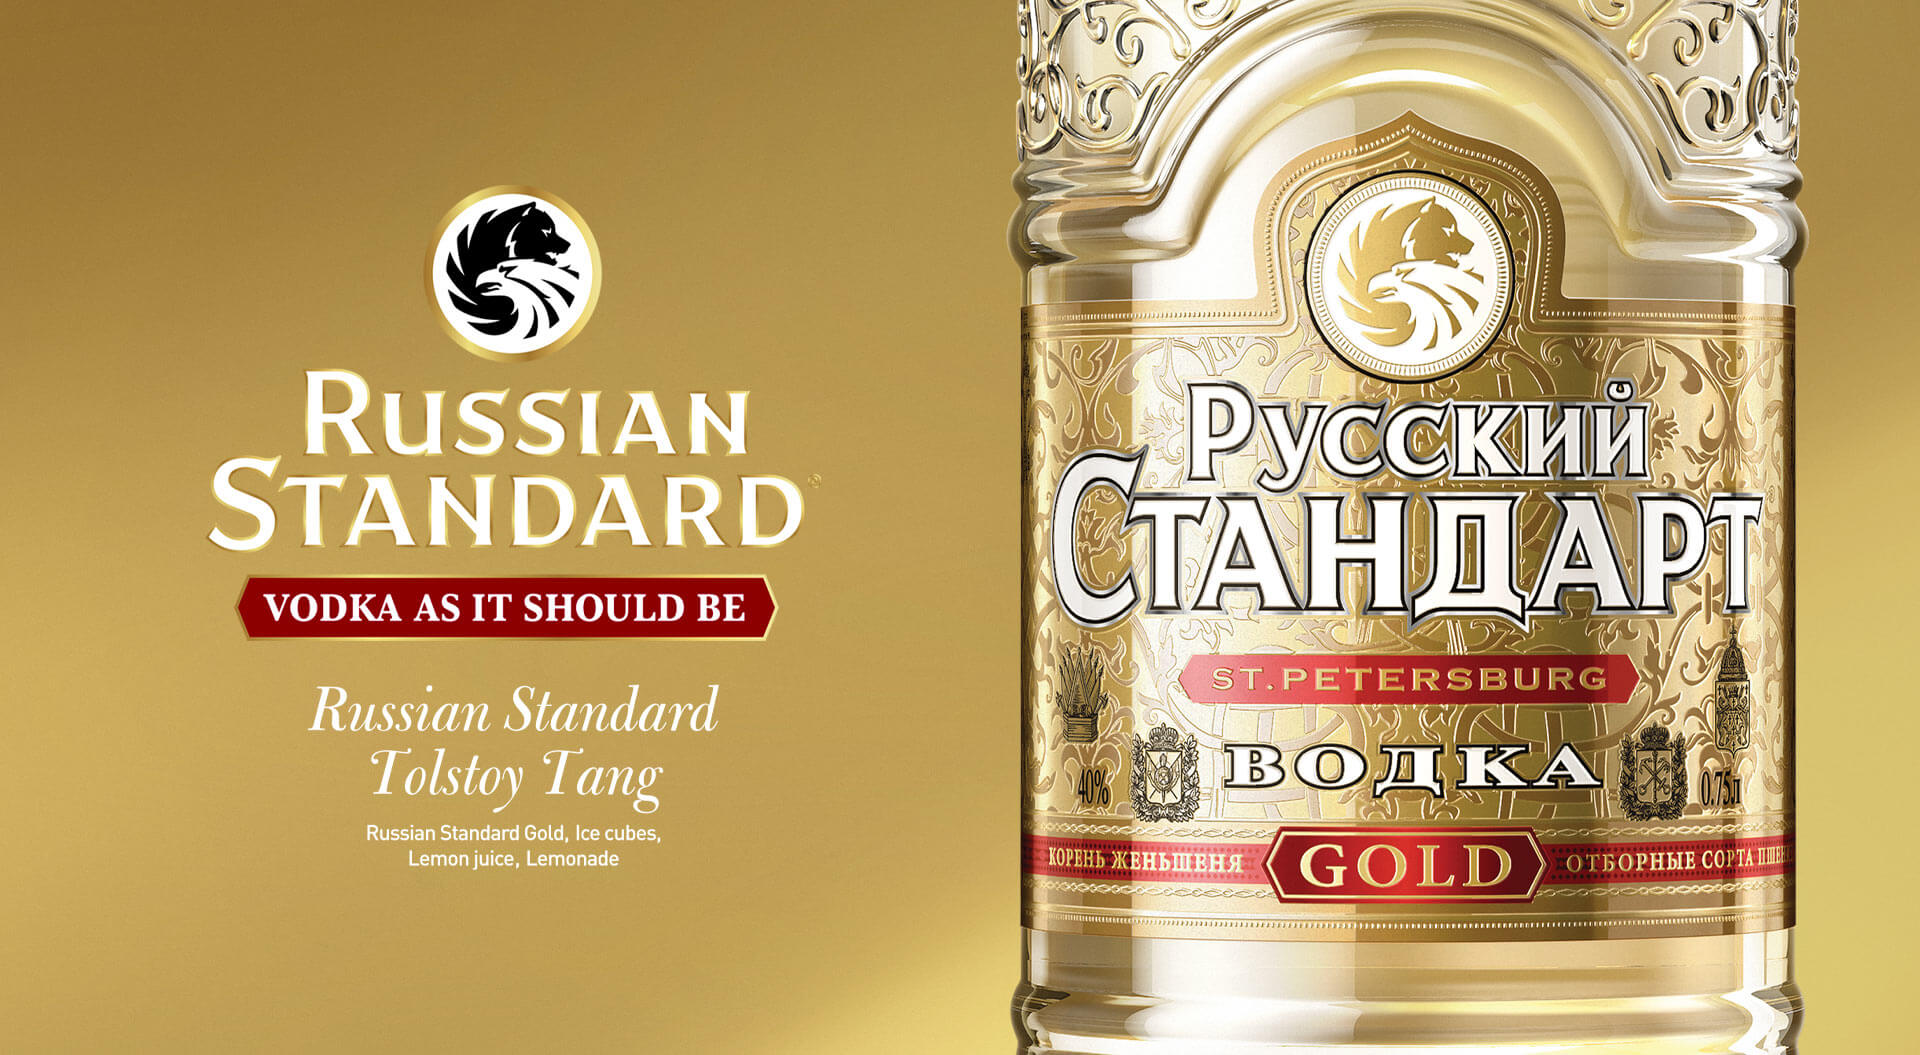 Russian Standard Vodka promotion campaign travel retail, marketing, retail design, airports, duty-free alcohol